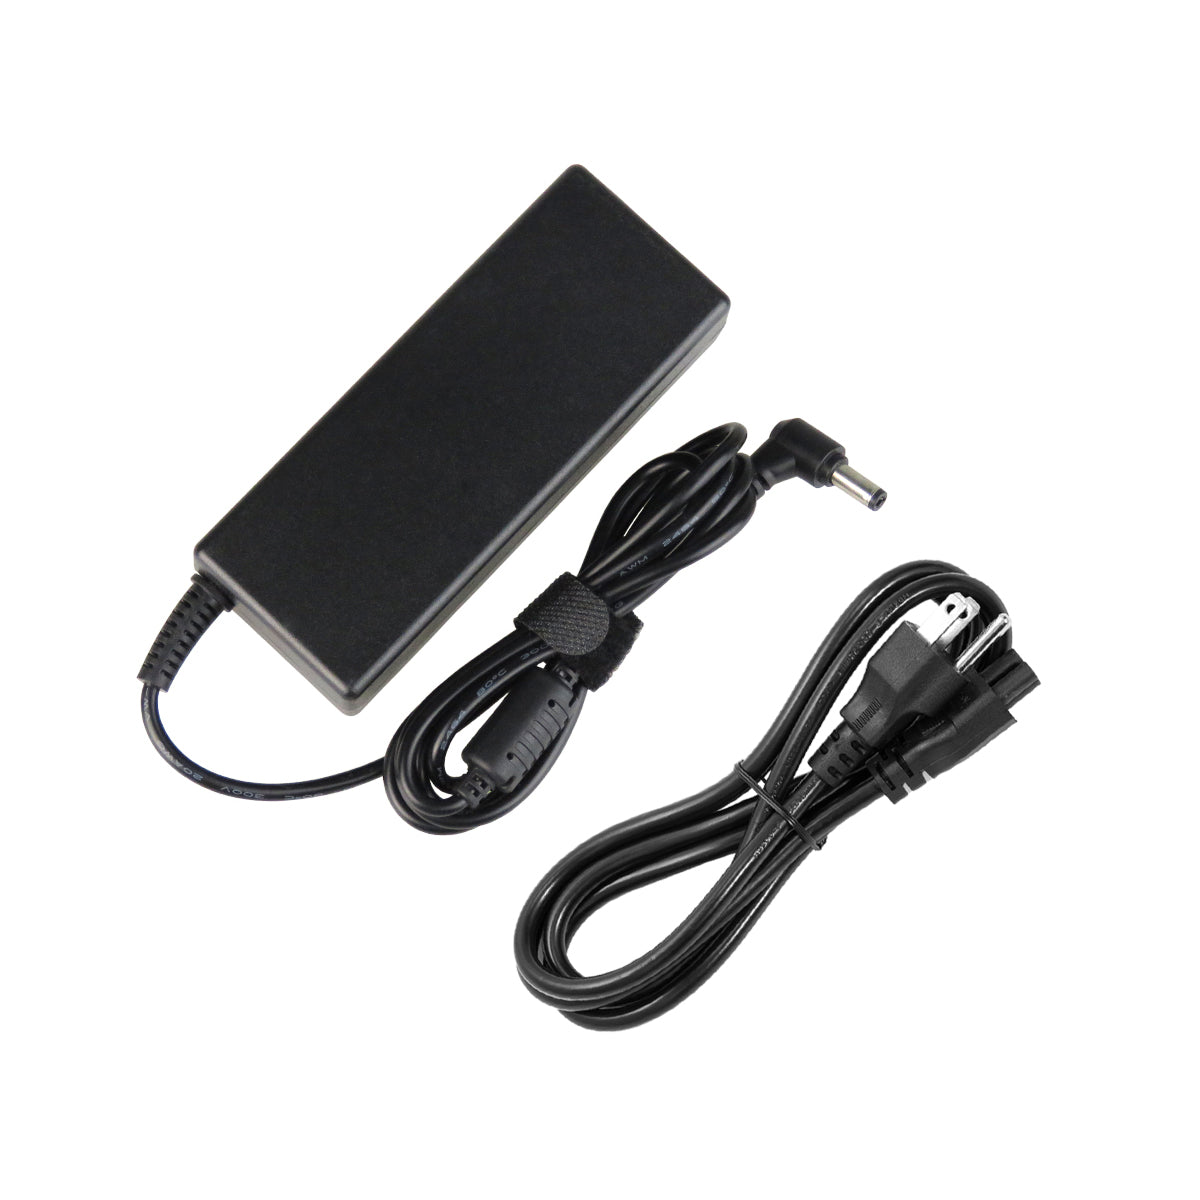 AC Adapter Charger for ASUS A43SM Notebook.